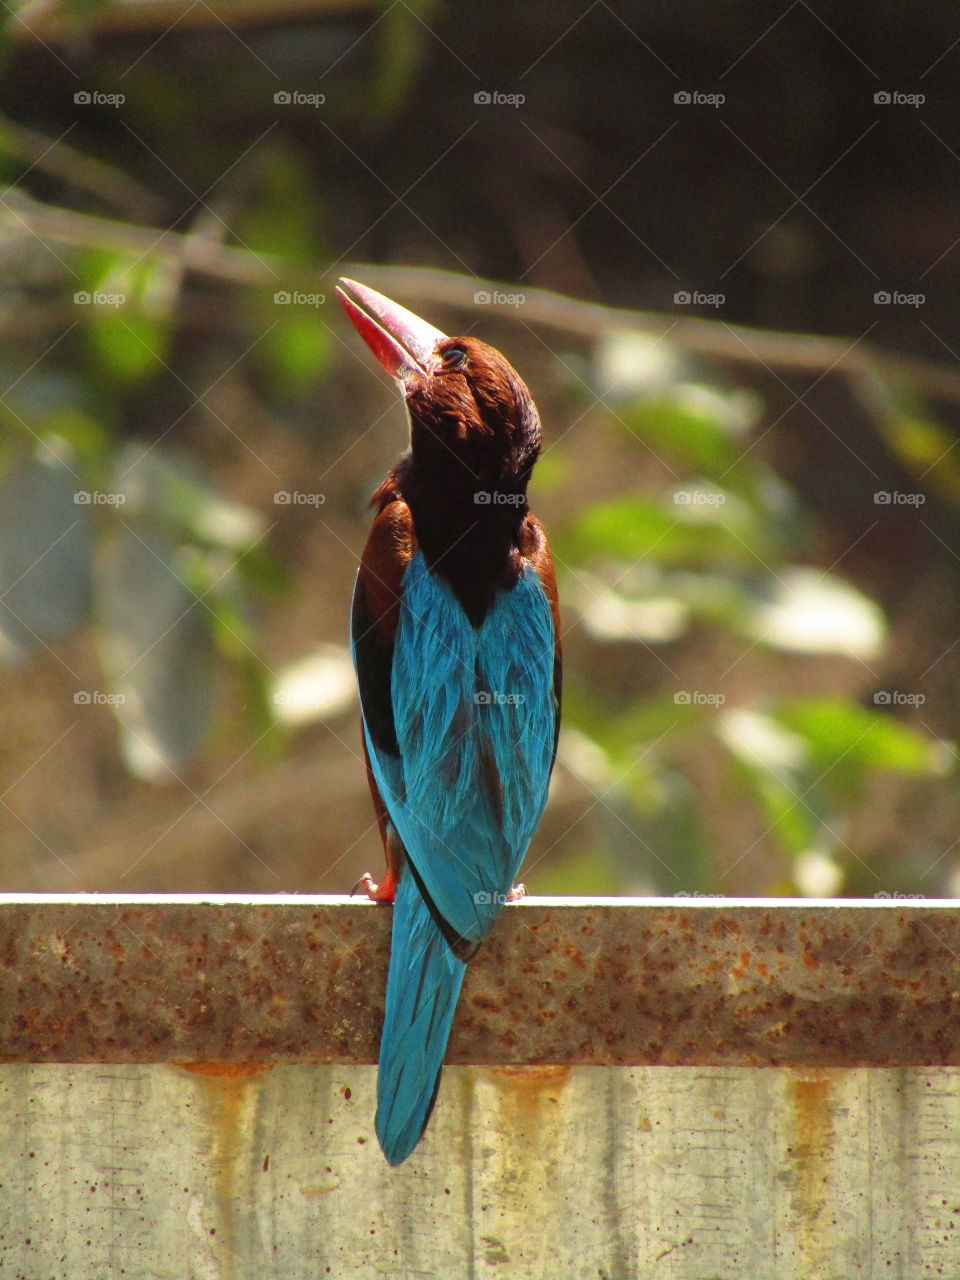 The white throated kingfisher (halcyon smyrnensis) also known as the white-breasted kingfisher.